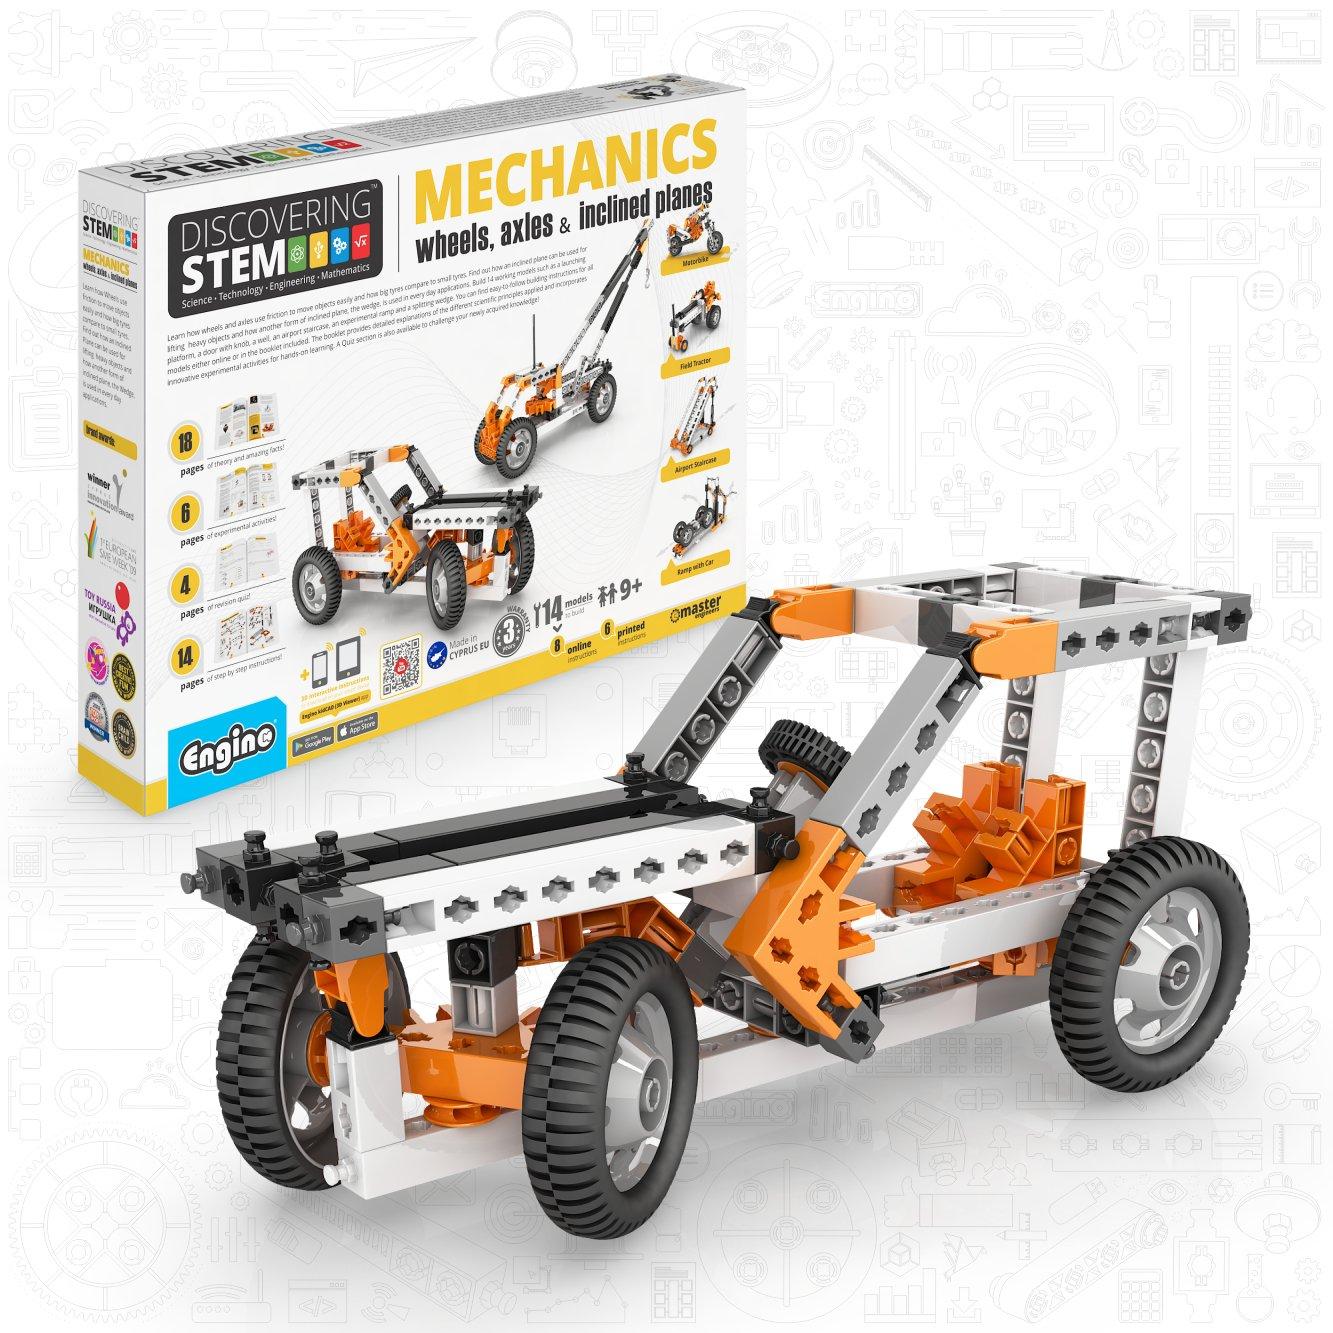 Discovering STEM Mechanics Wheels, Axles & Inclined planes